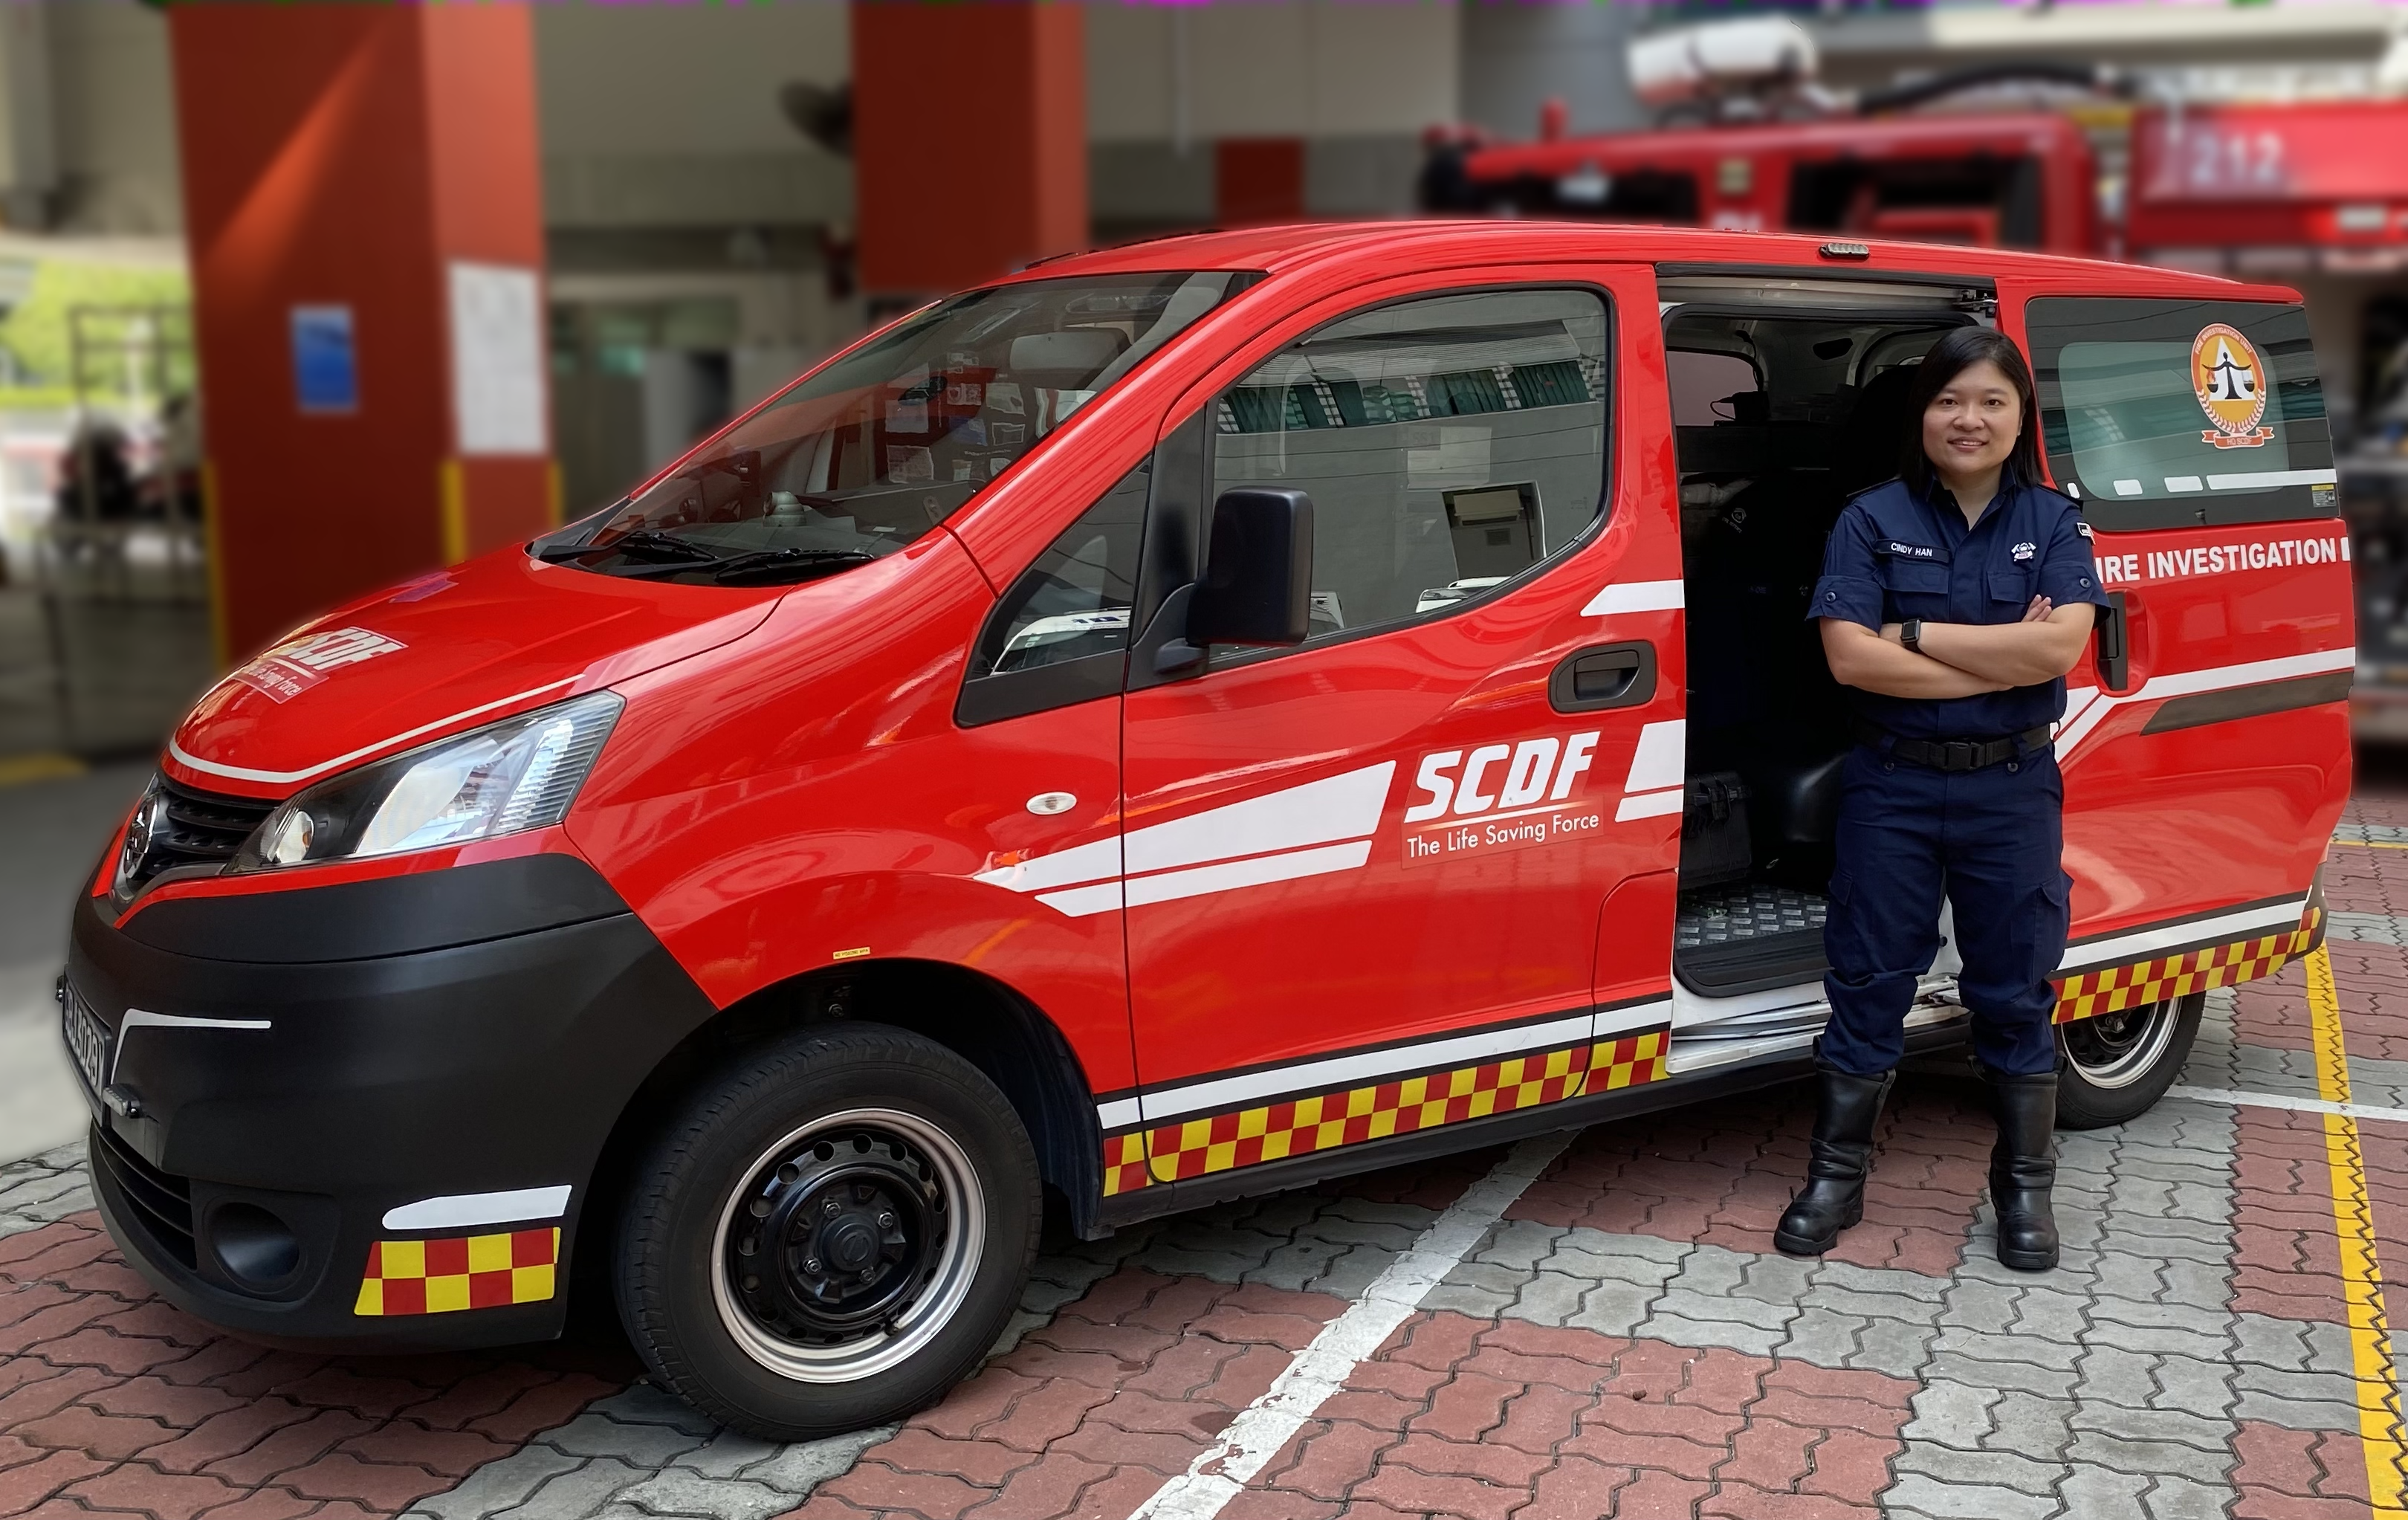 Captain (CPT) Cindy Han and the SCDF Fire Investigation Vehicle